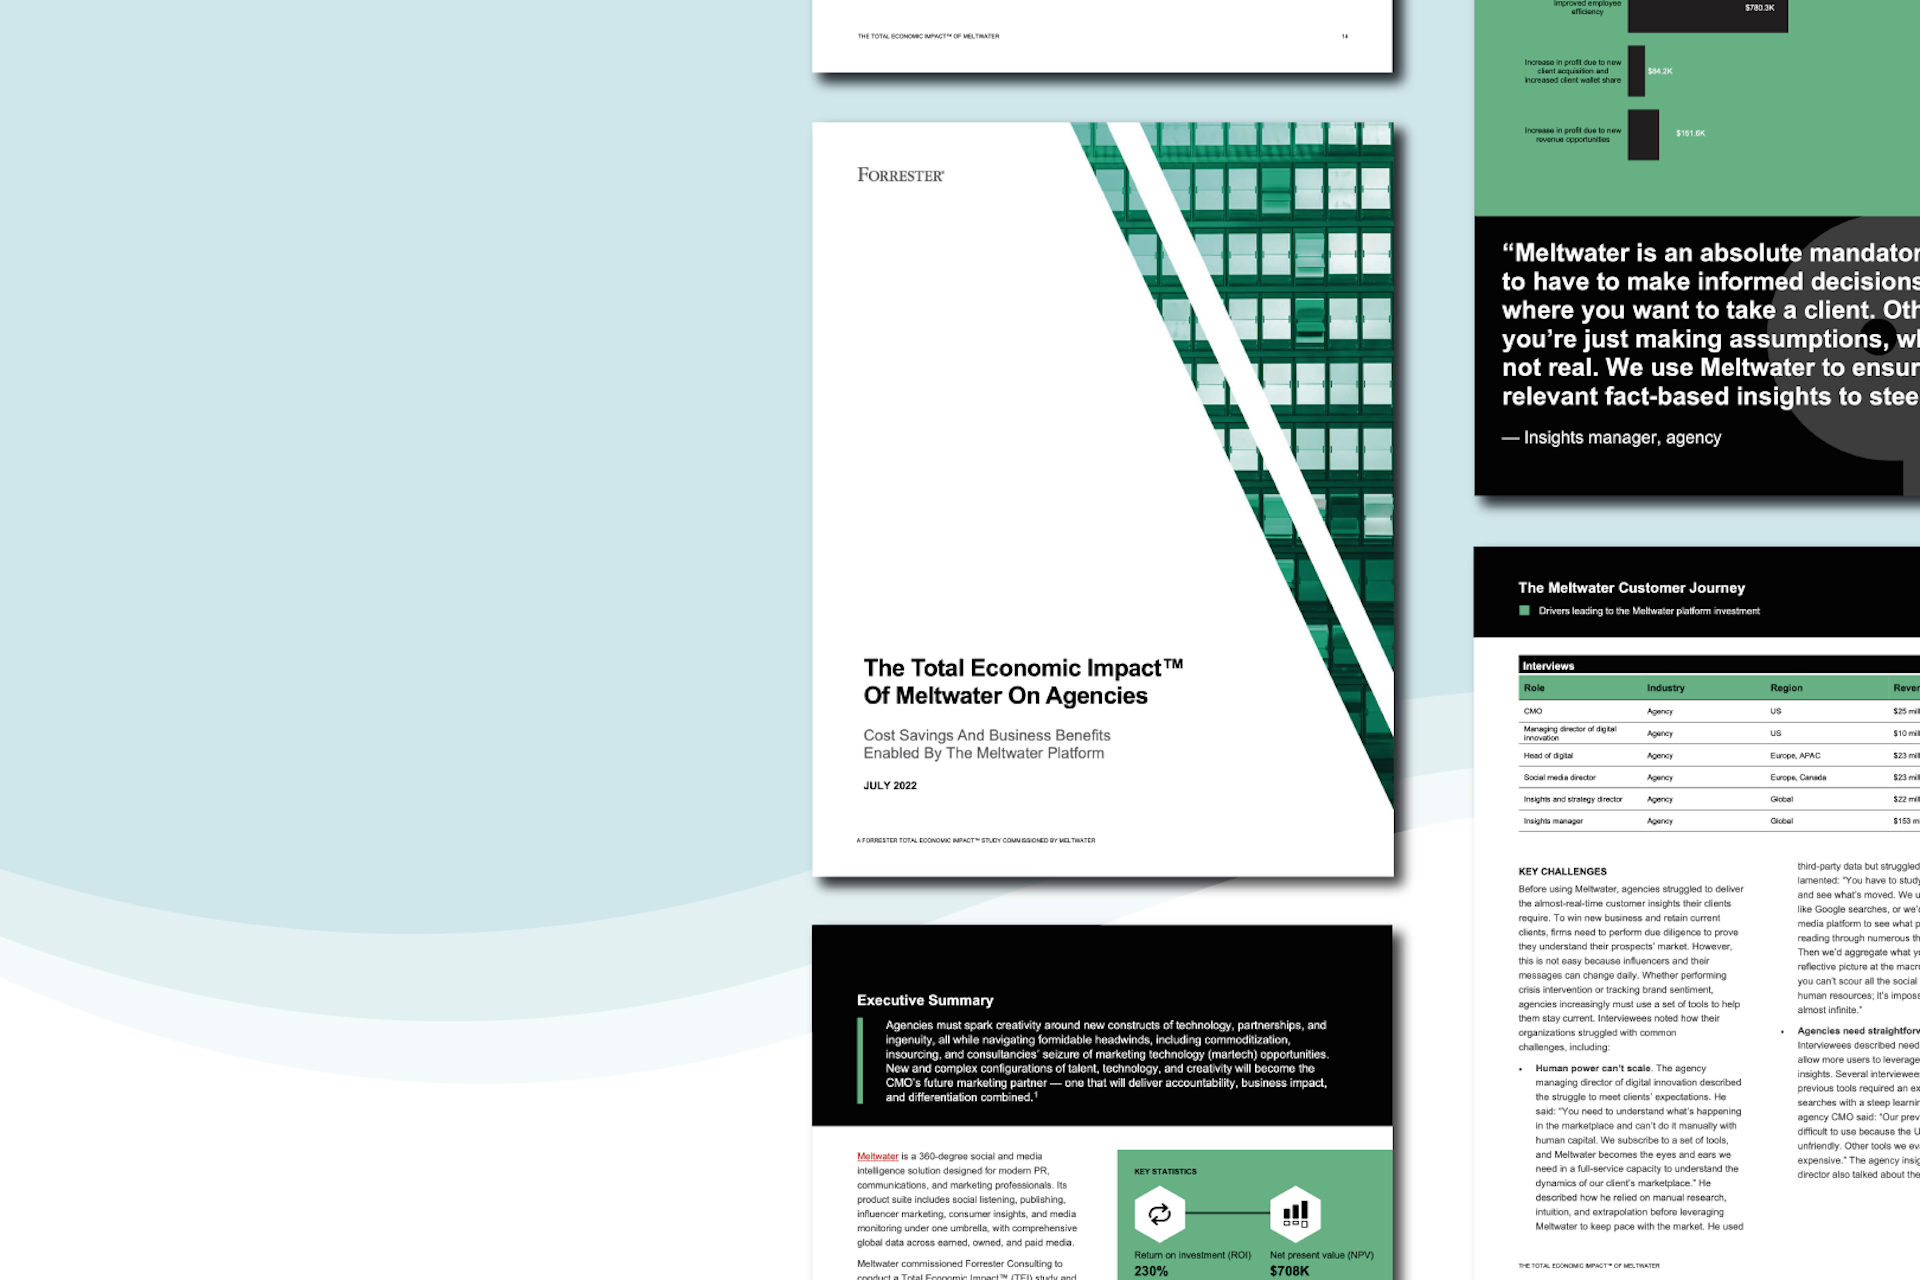 Forrester study Impact of Meltwater on Agencies